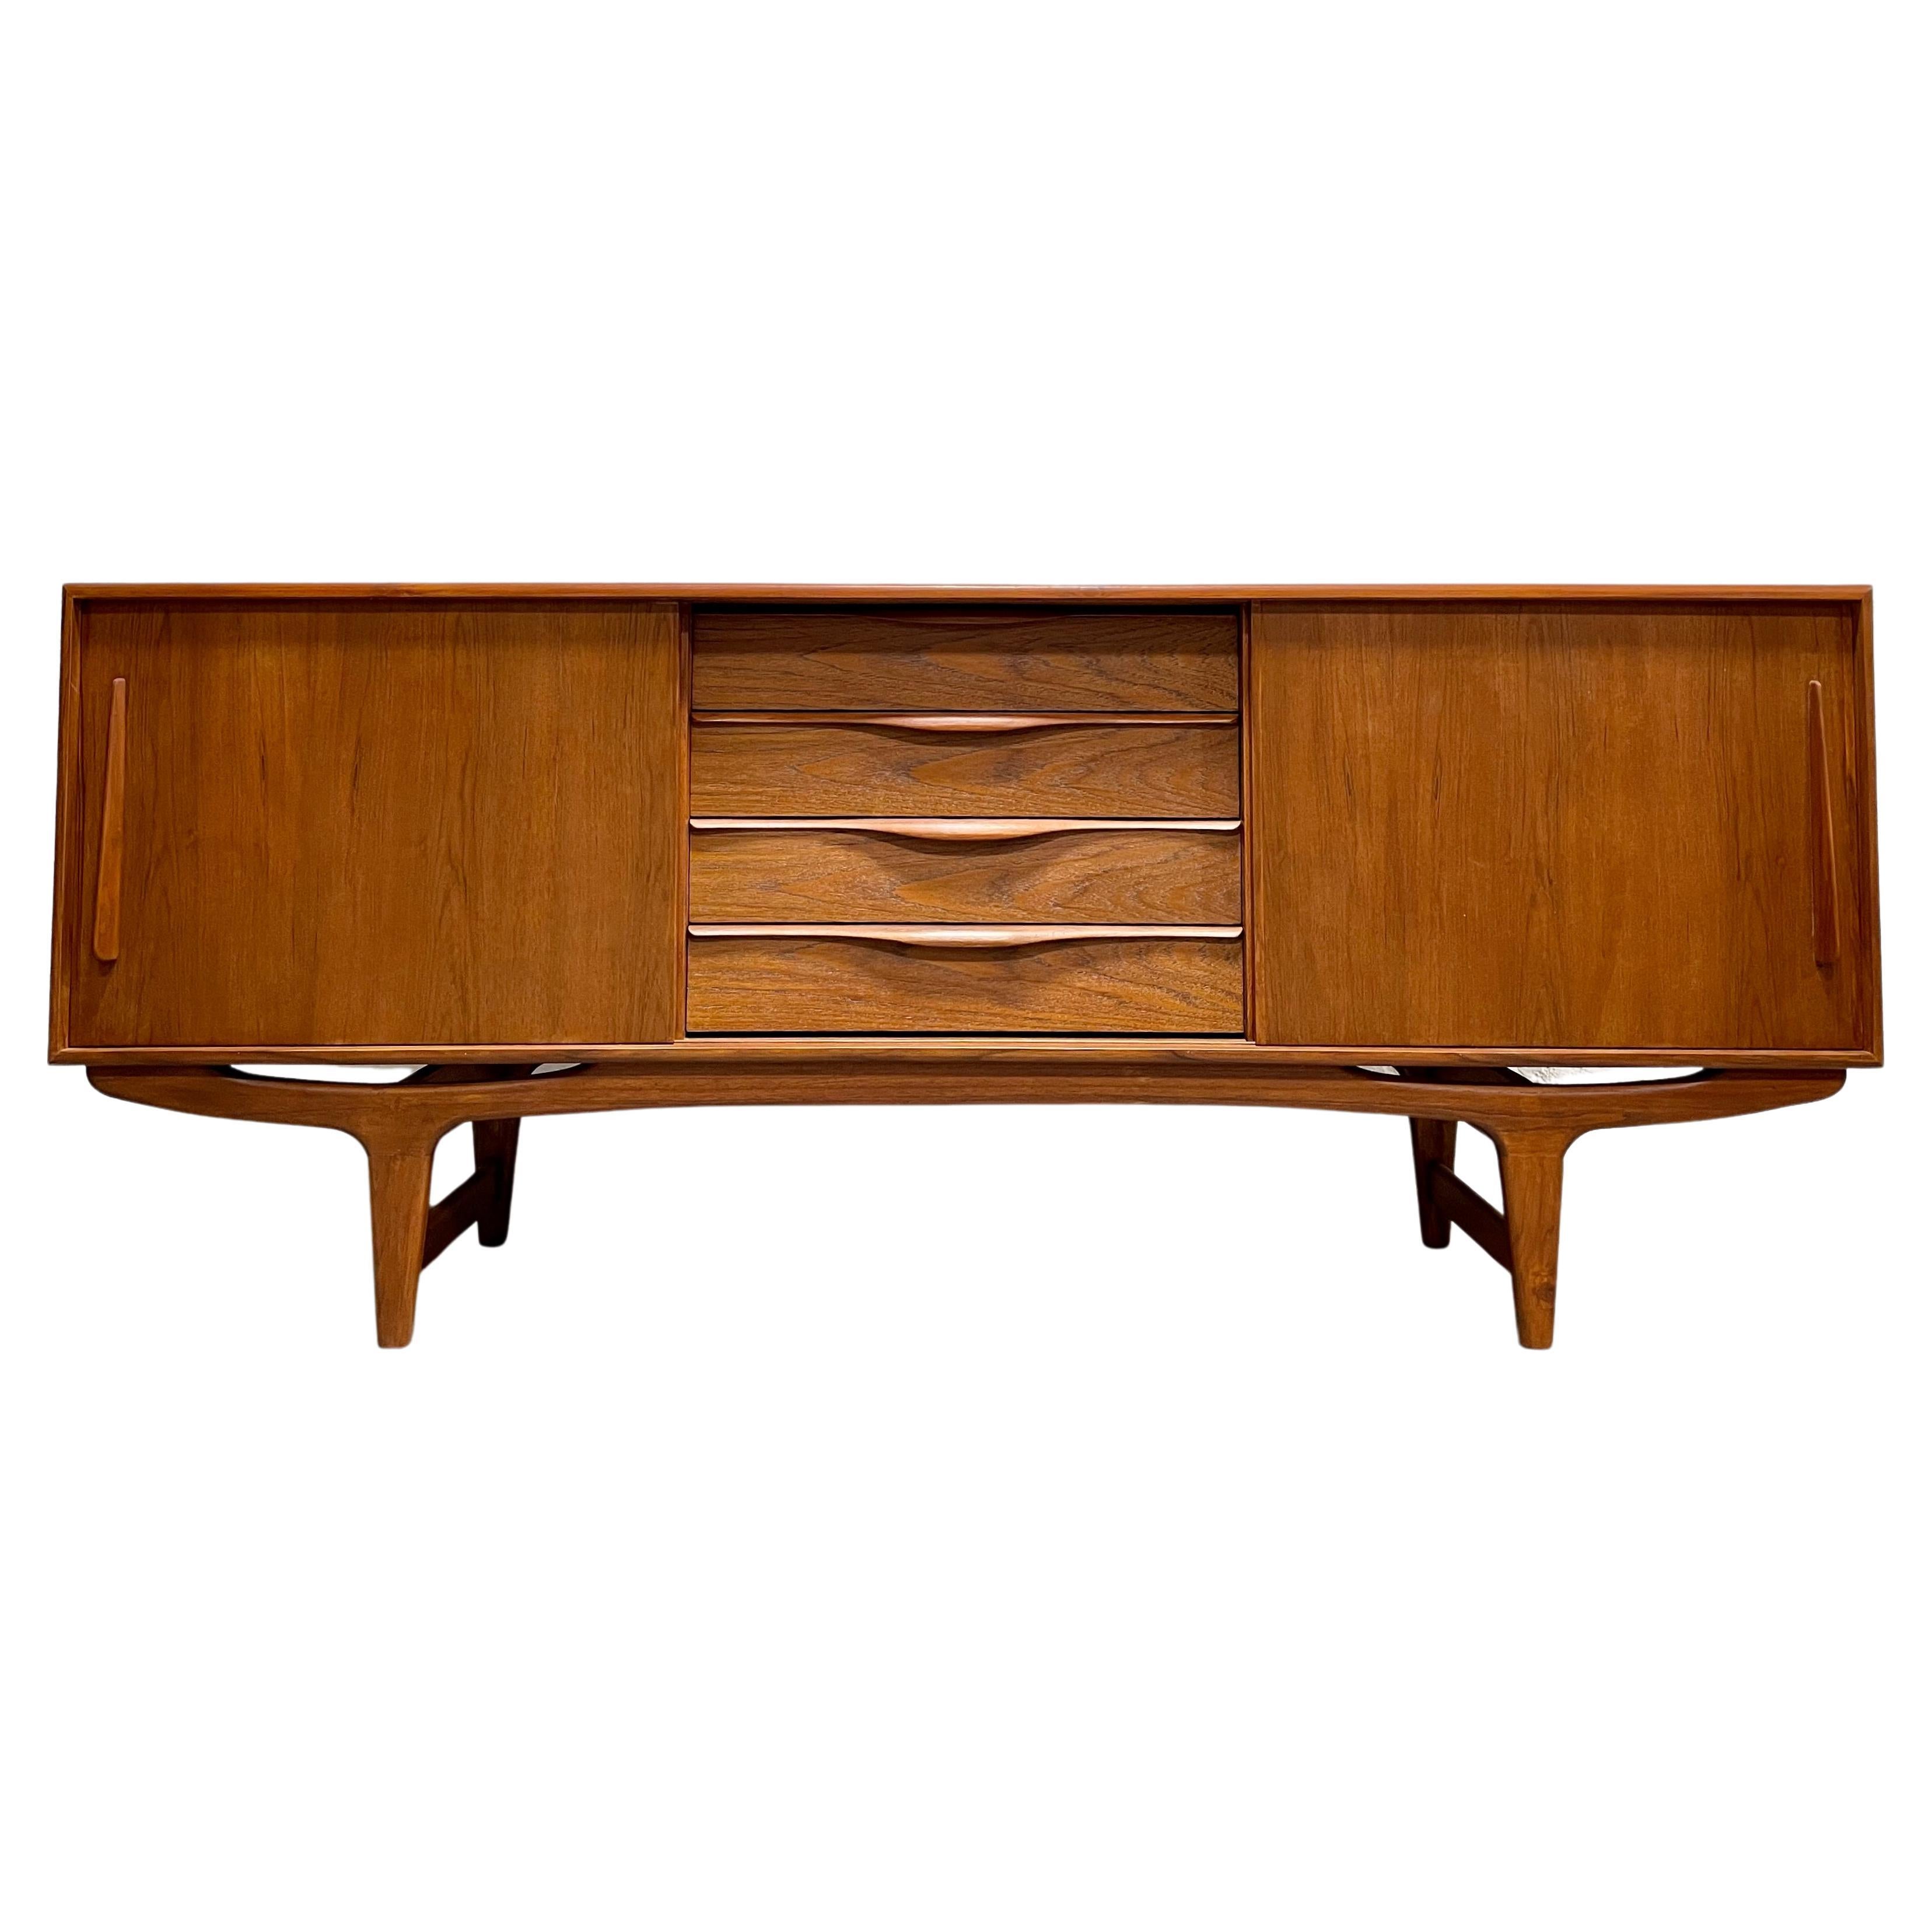 Long sculpted Mid-Century Modern styled credenza / media stand featuring sculptural hand pulls and leg design. Excellent layout for a media stand - generous shelving for components paired with streamlined drawers for remotes, dvds and other